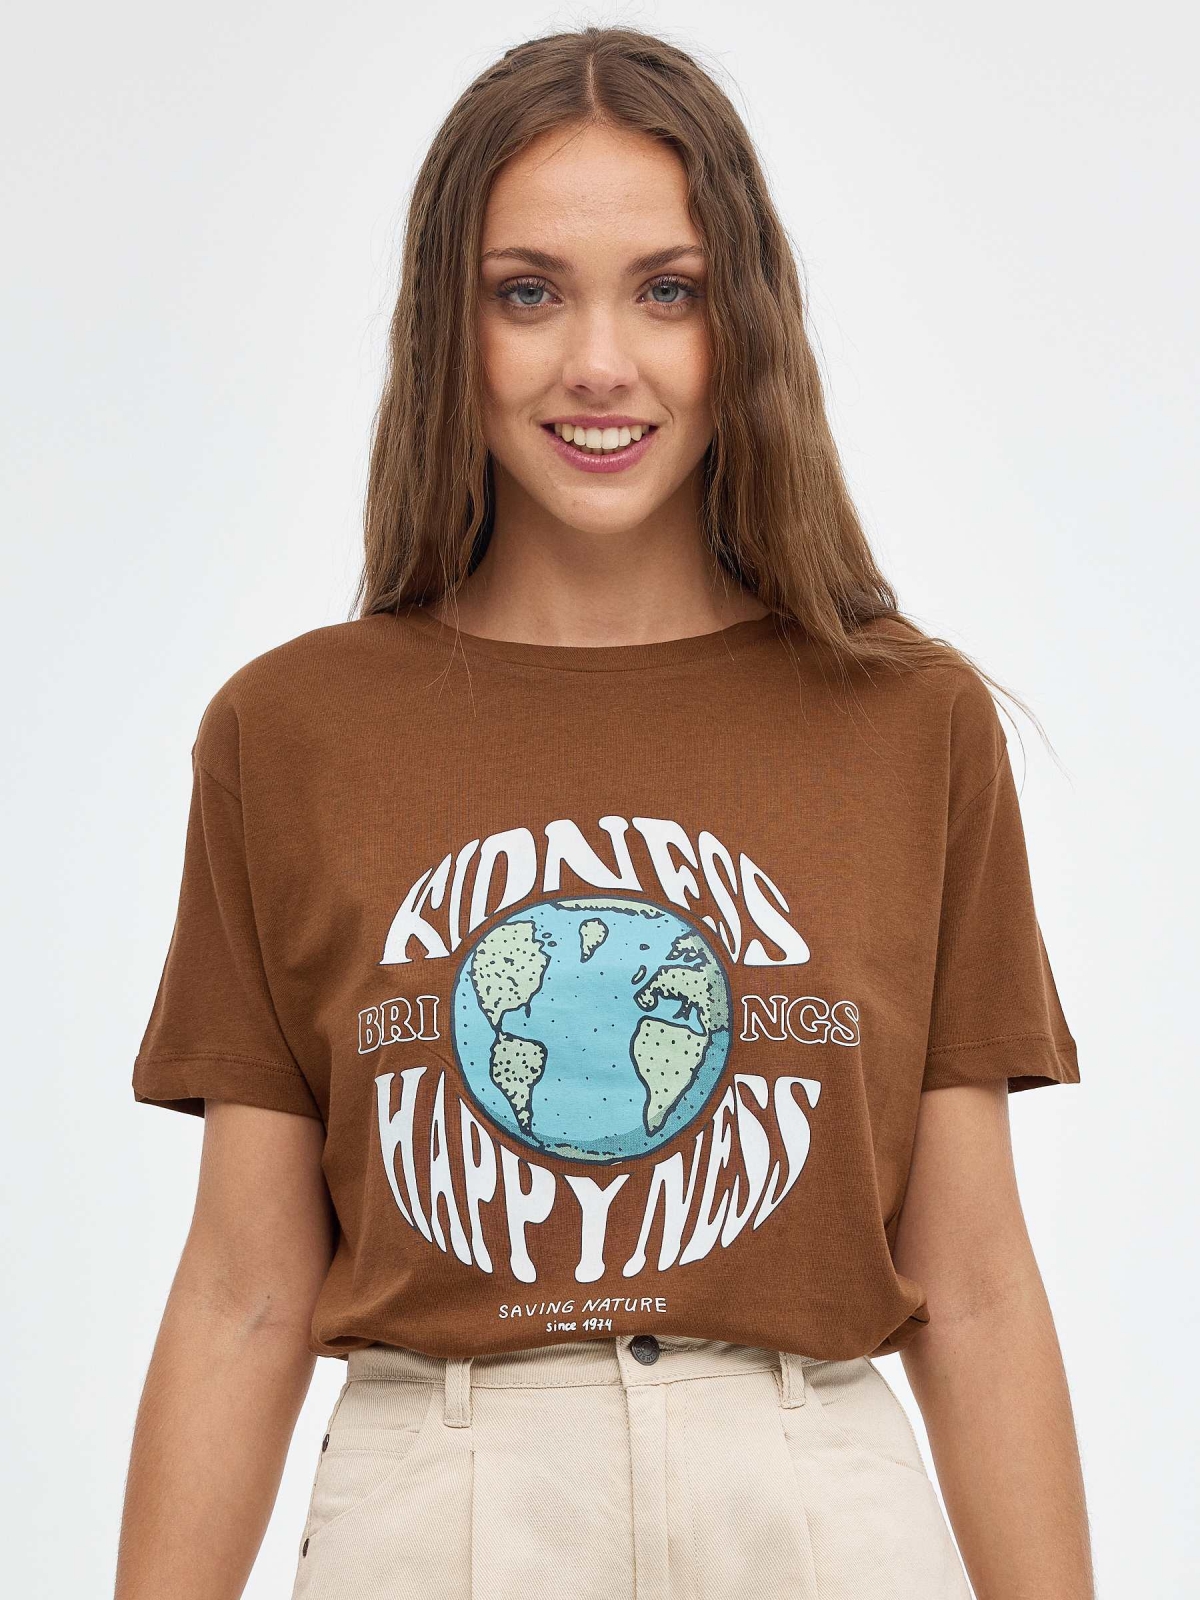 Happyness oversized T-shirt dark brown middle front view